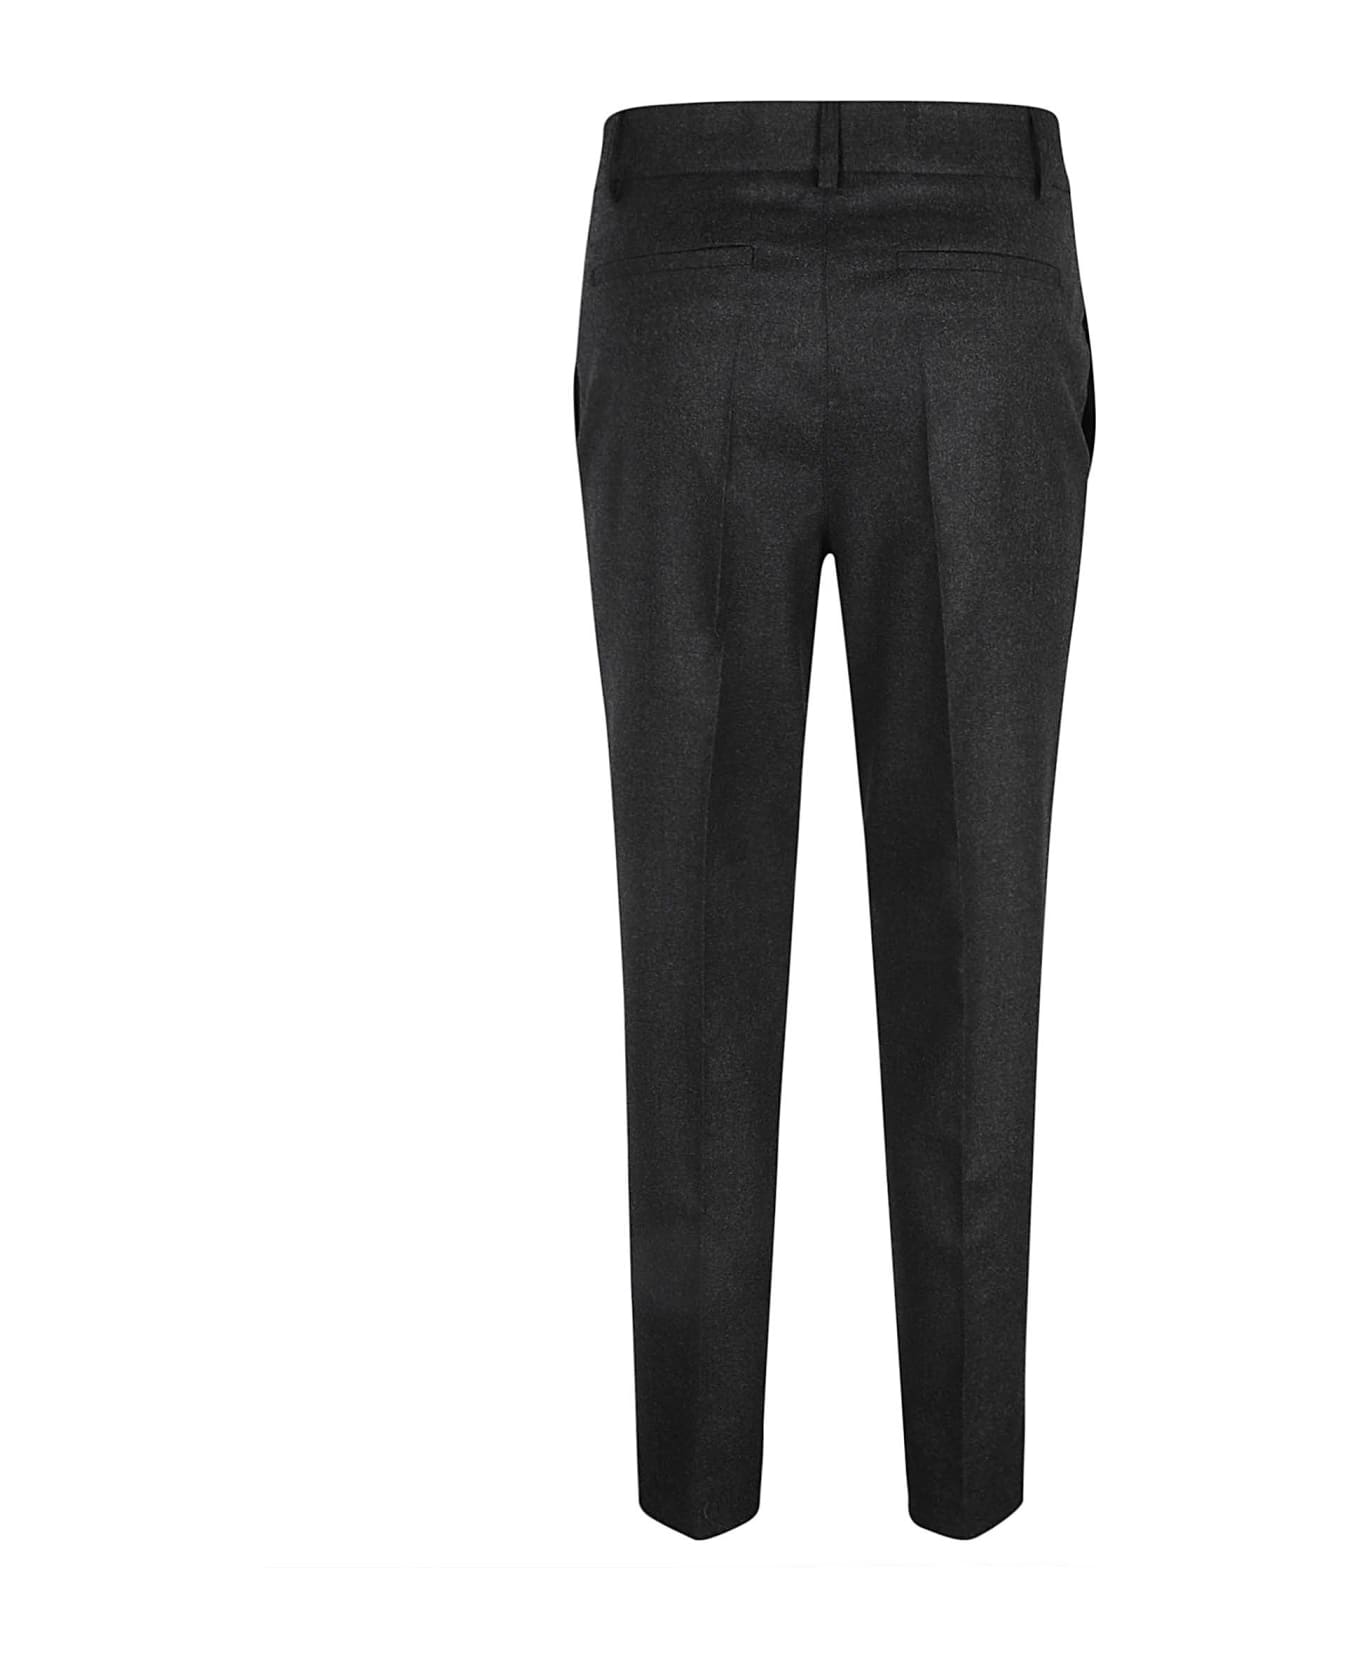 Parosh Lowell Trousers - Anthracite